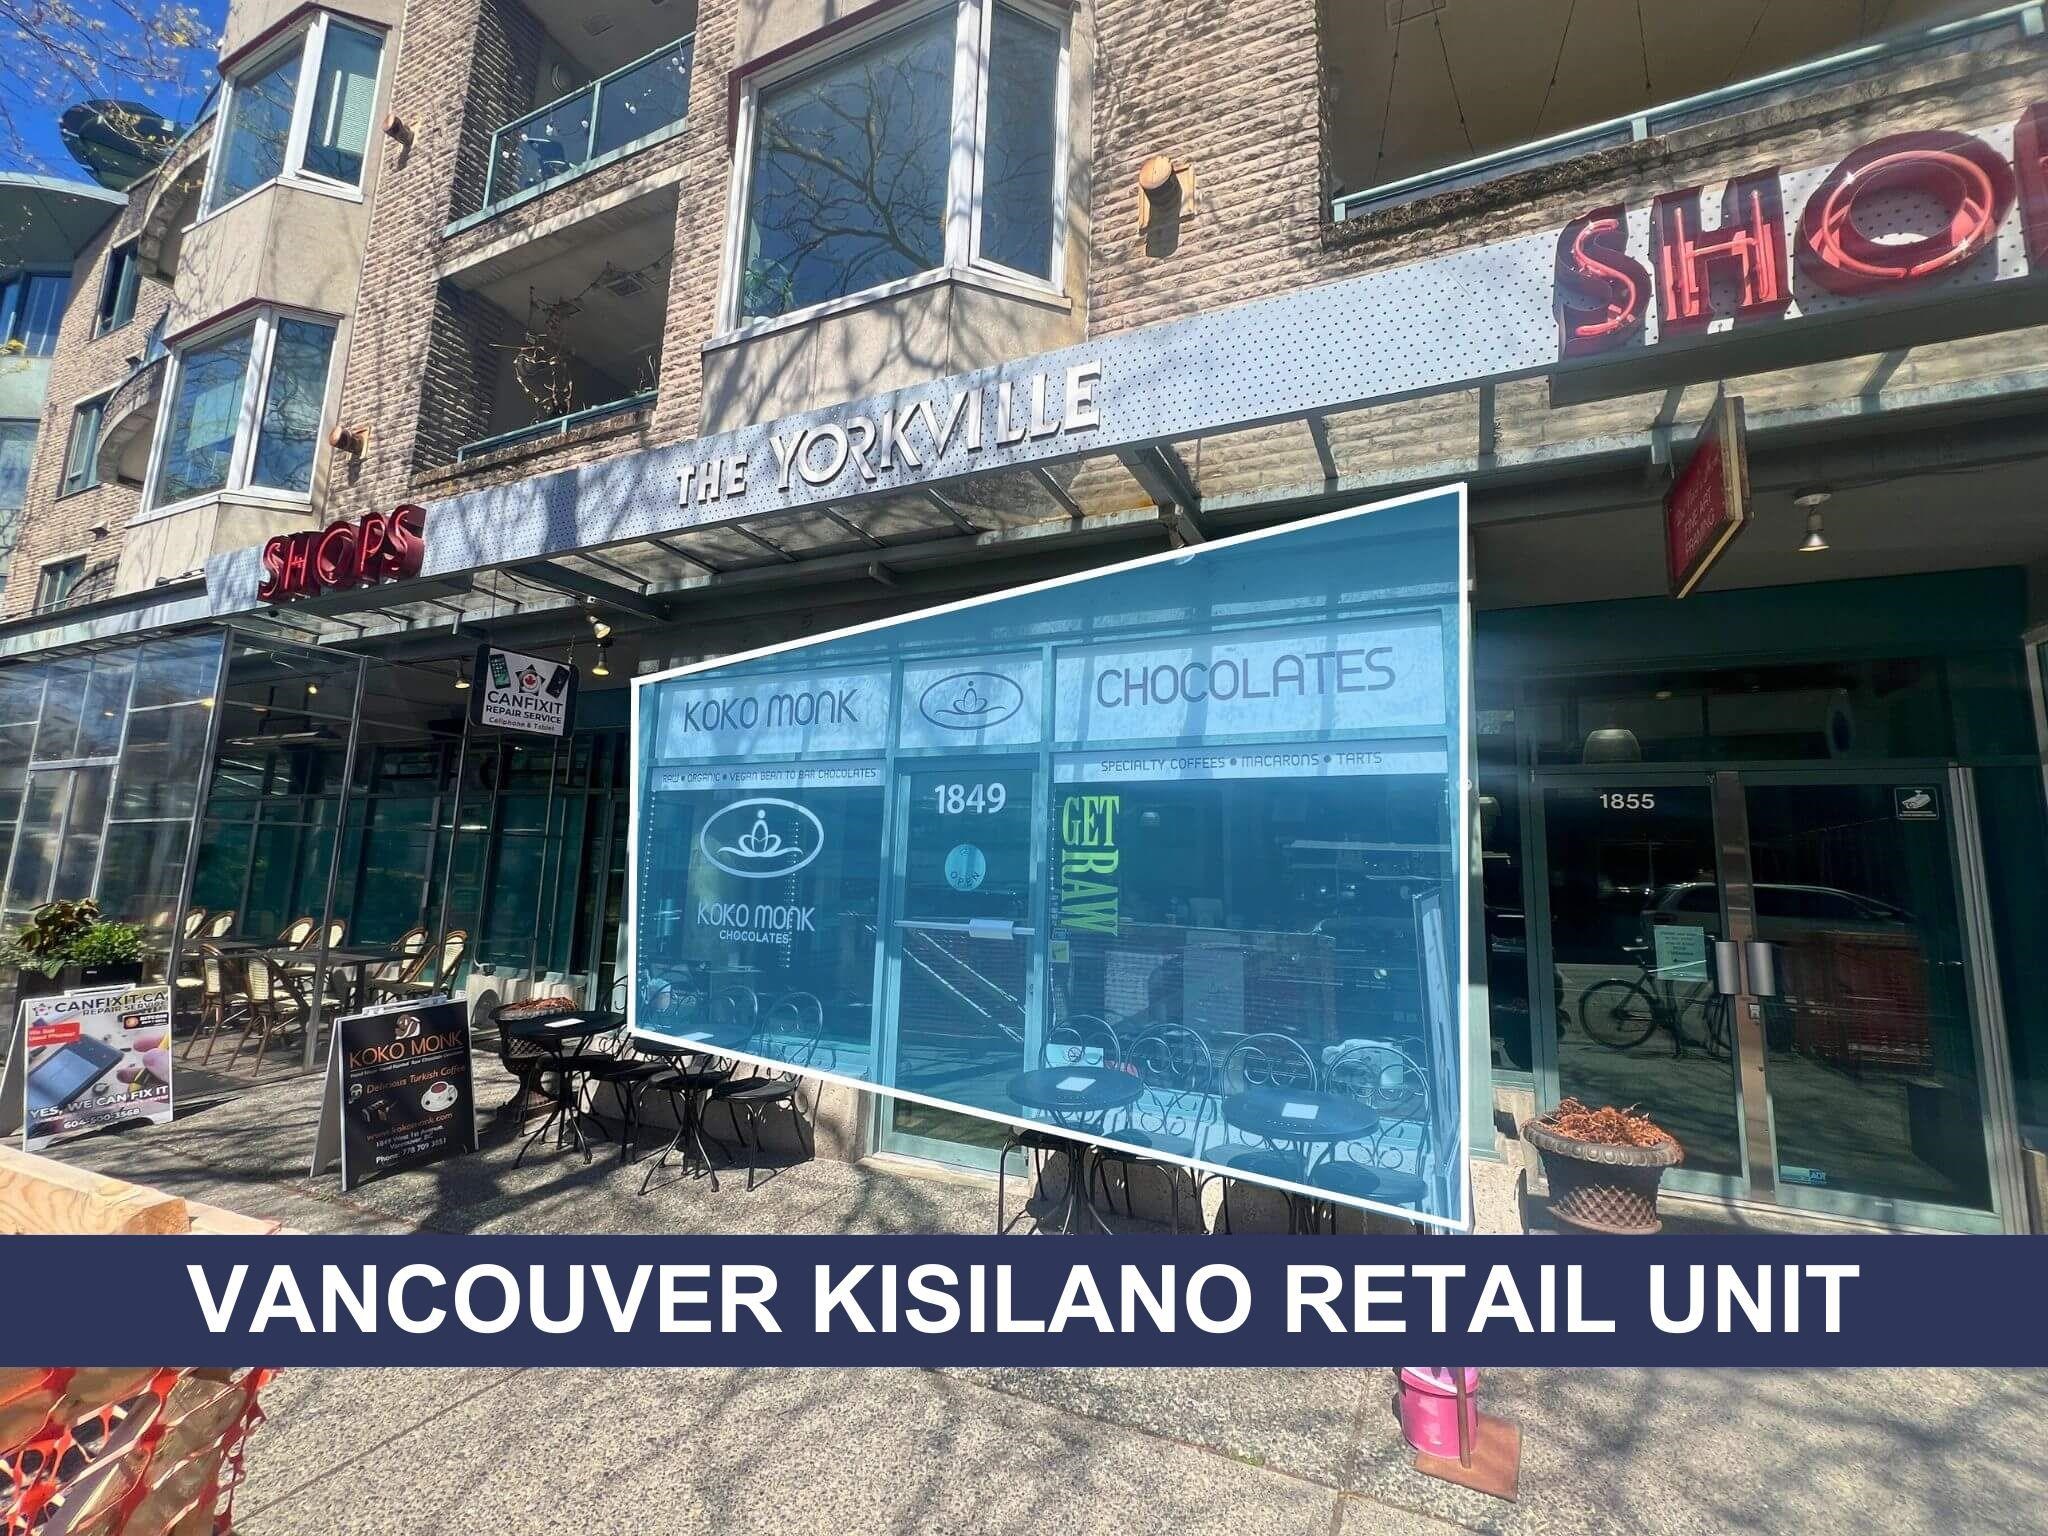 Kitsilano Land Commercial for sale:    (Listed 6800-05-07)